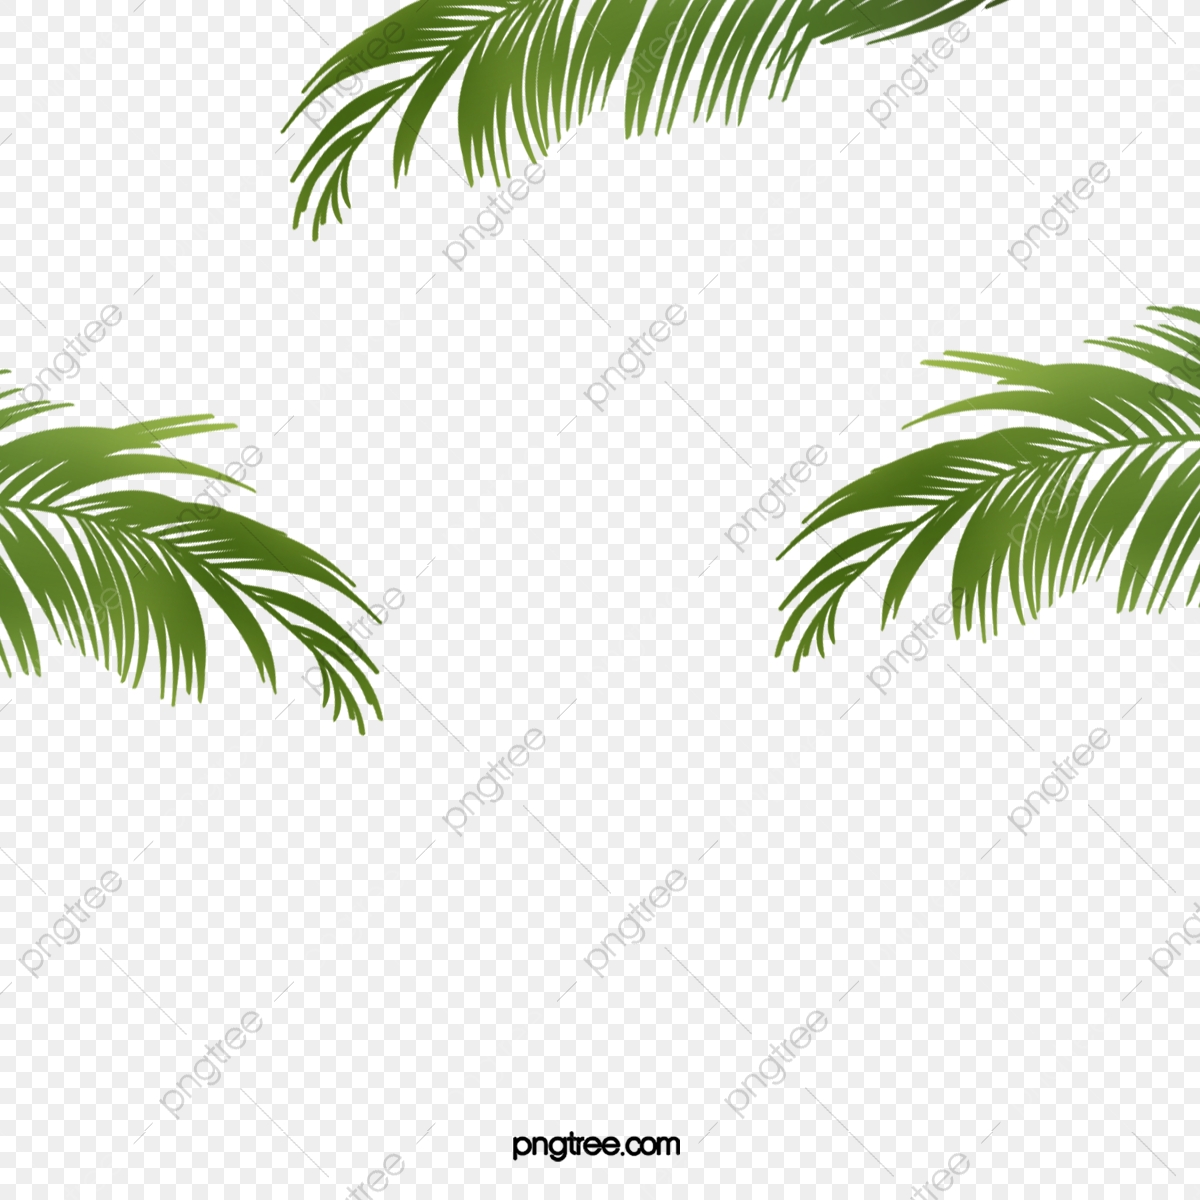 Coconut clipart border. Green leaves texture 